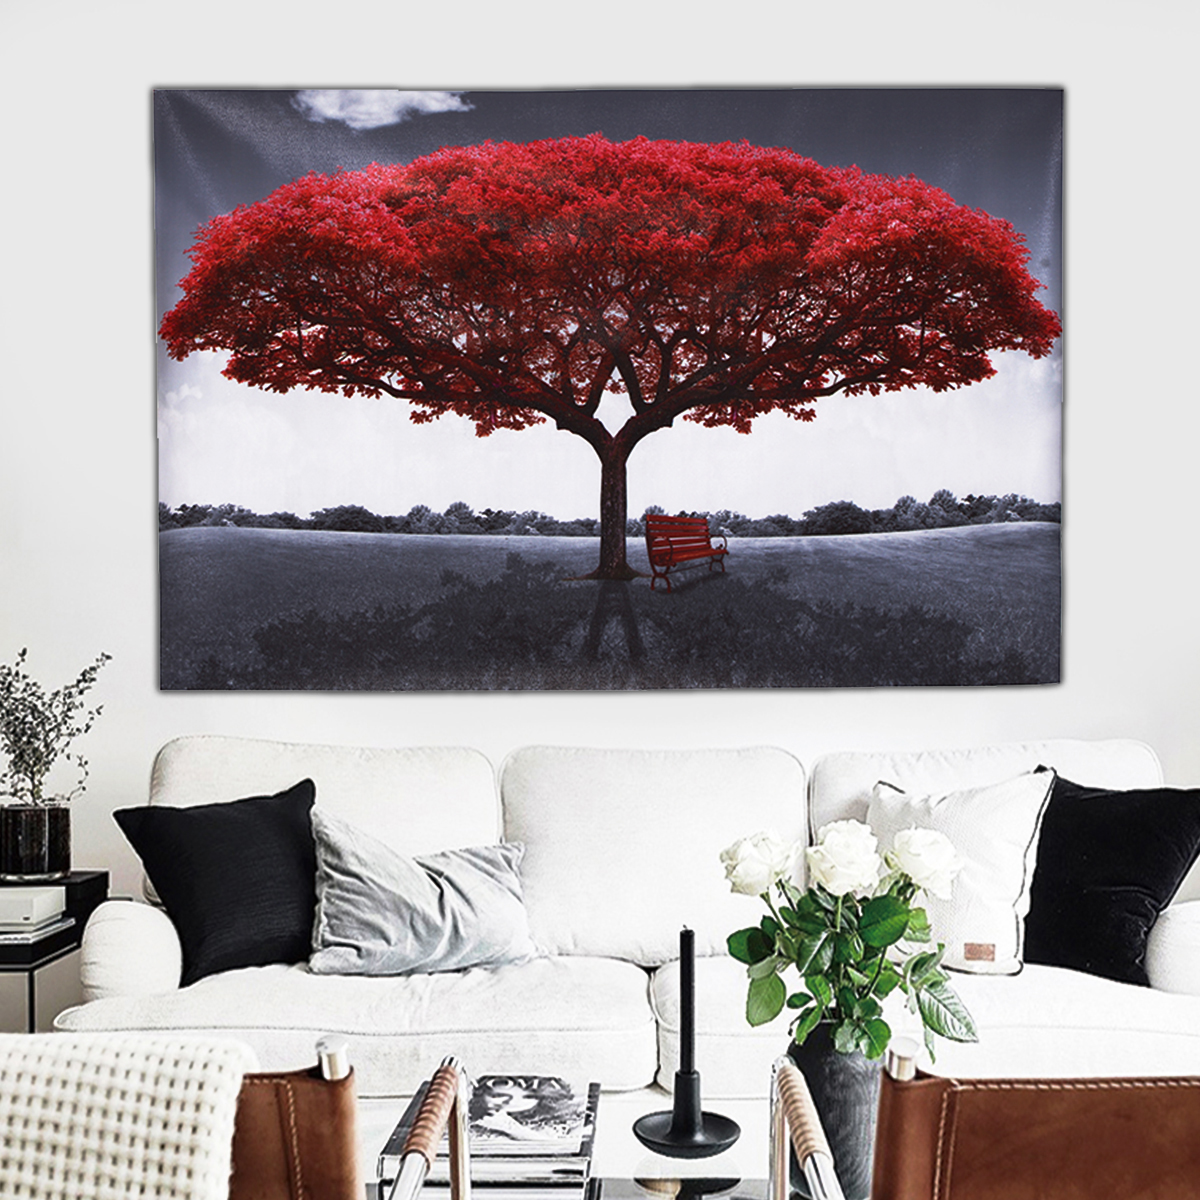 Large-Red-Tree-Canvas-Modern-Home-Wall-Decor-Art-Paintings-Picture-Print-No-Frame-Home-Decorations-1337172